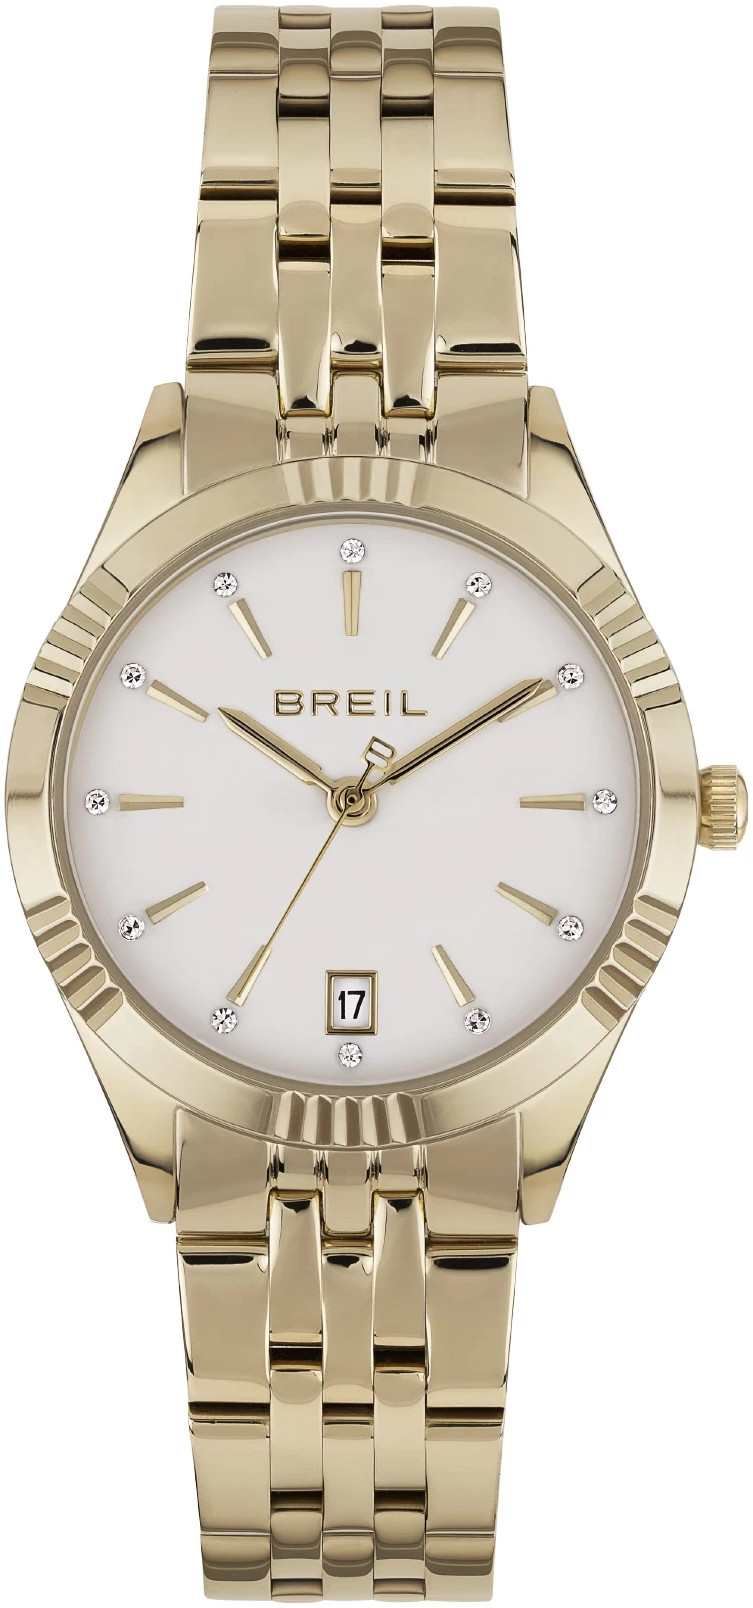 BREIL Stand Out TW1994